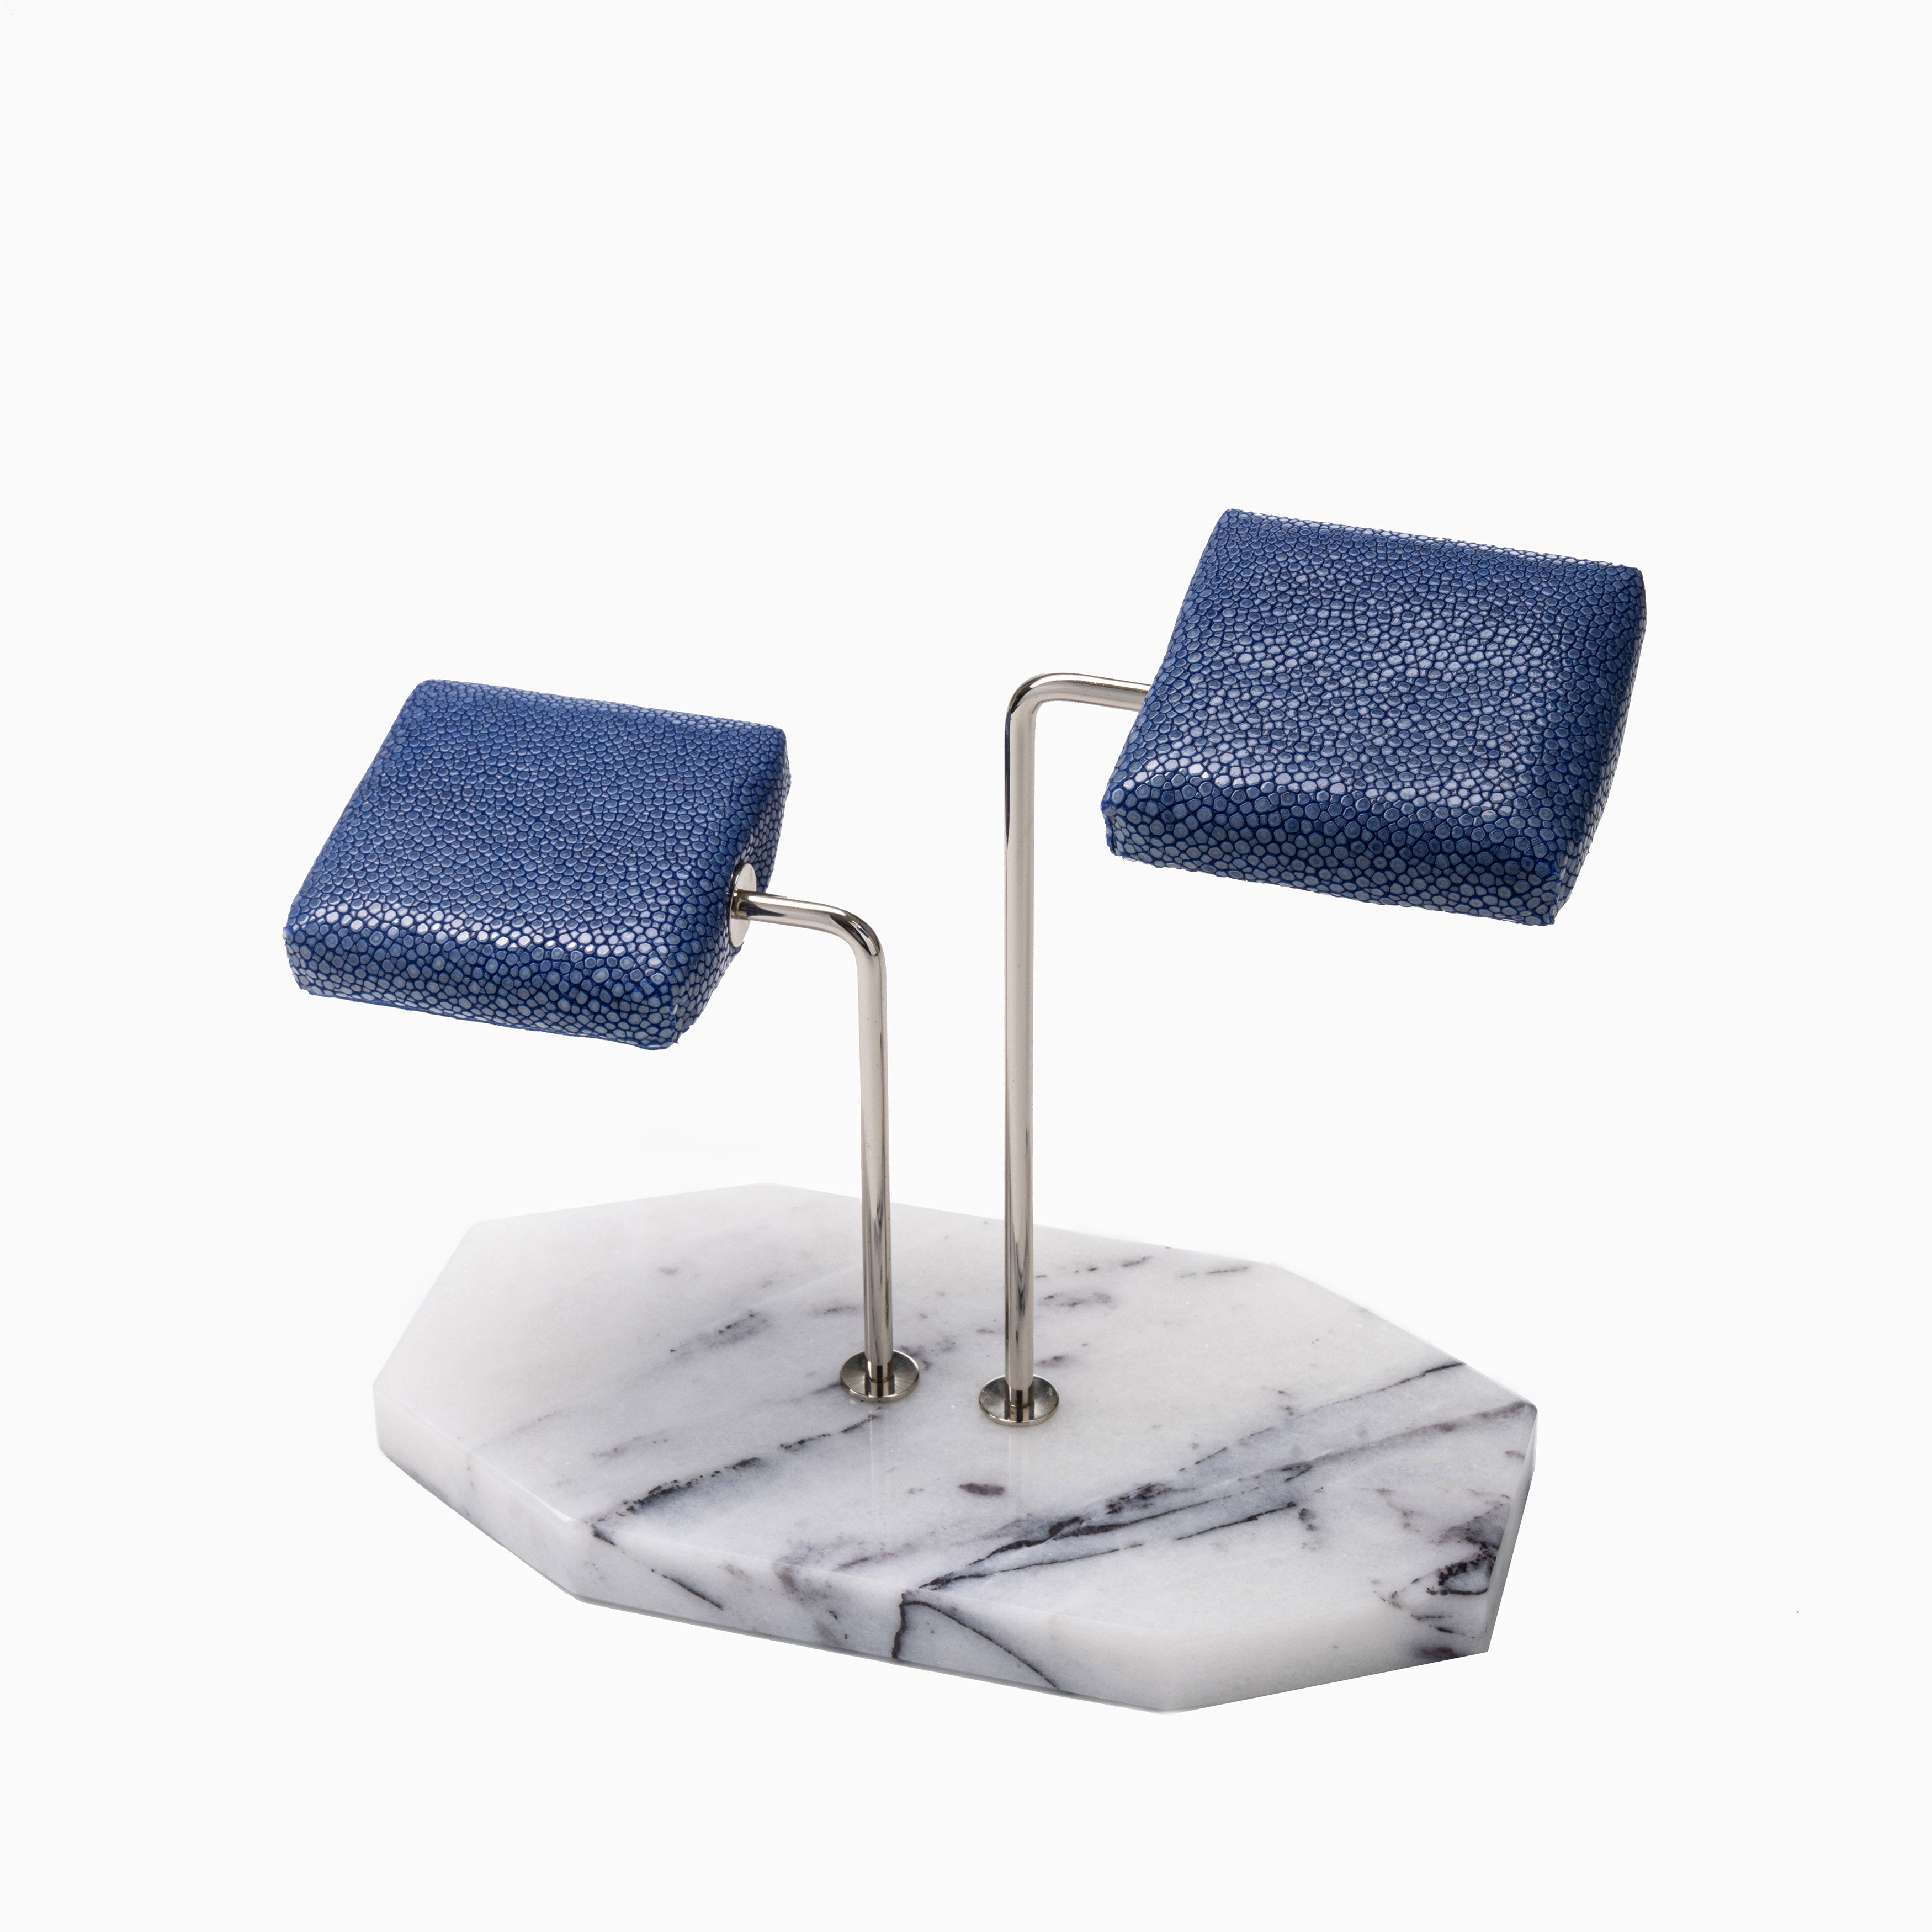 Dual Watch Stand - Blue Stingray (Limited Edition)